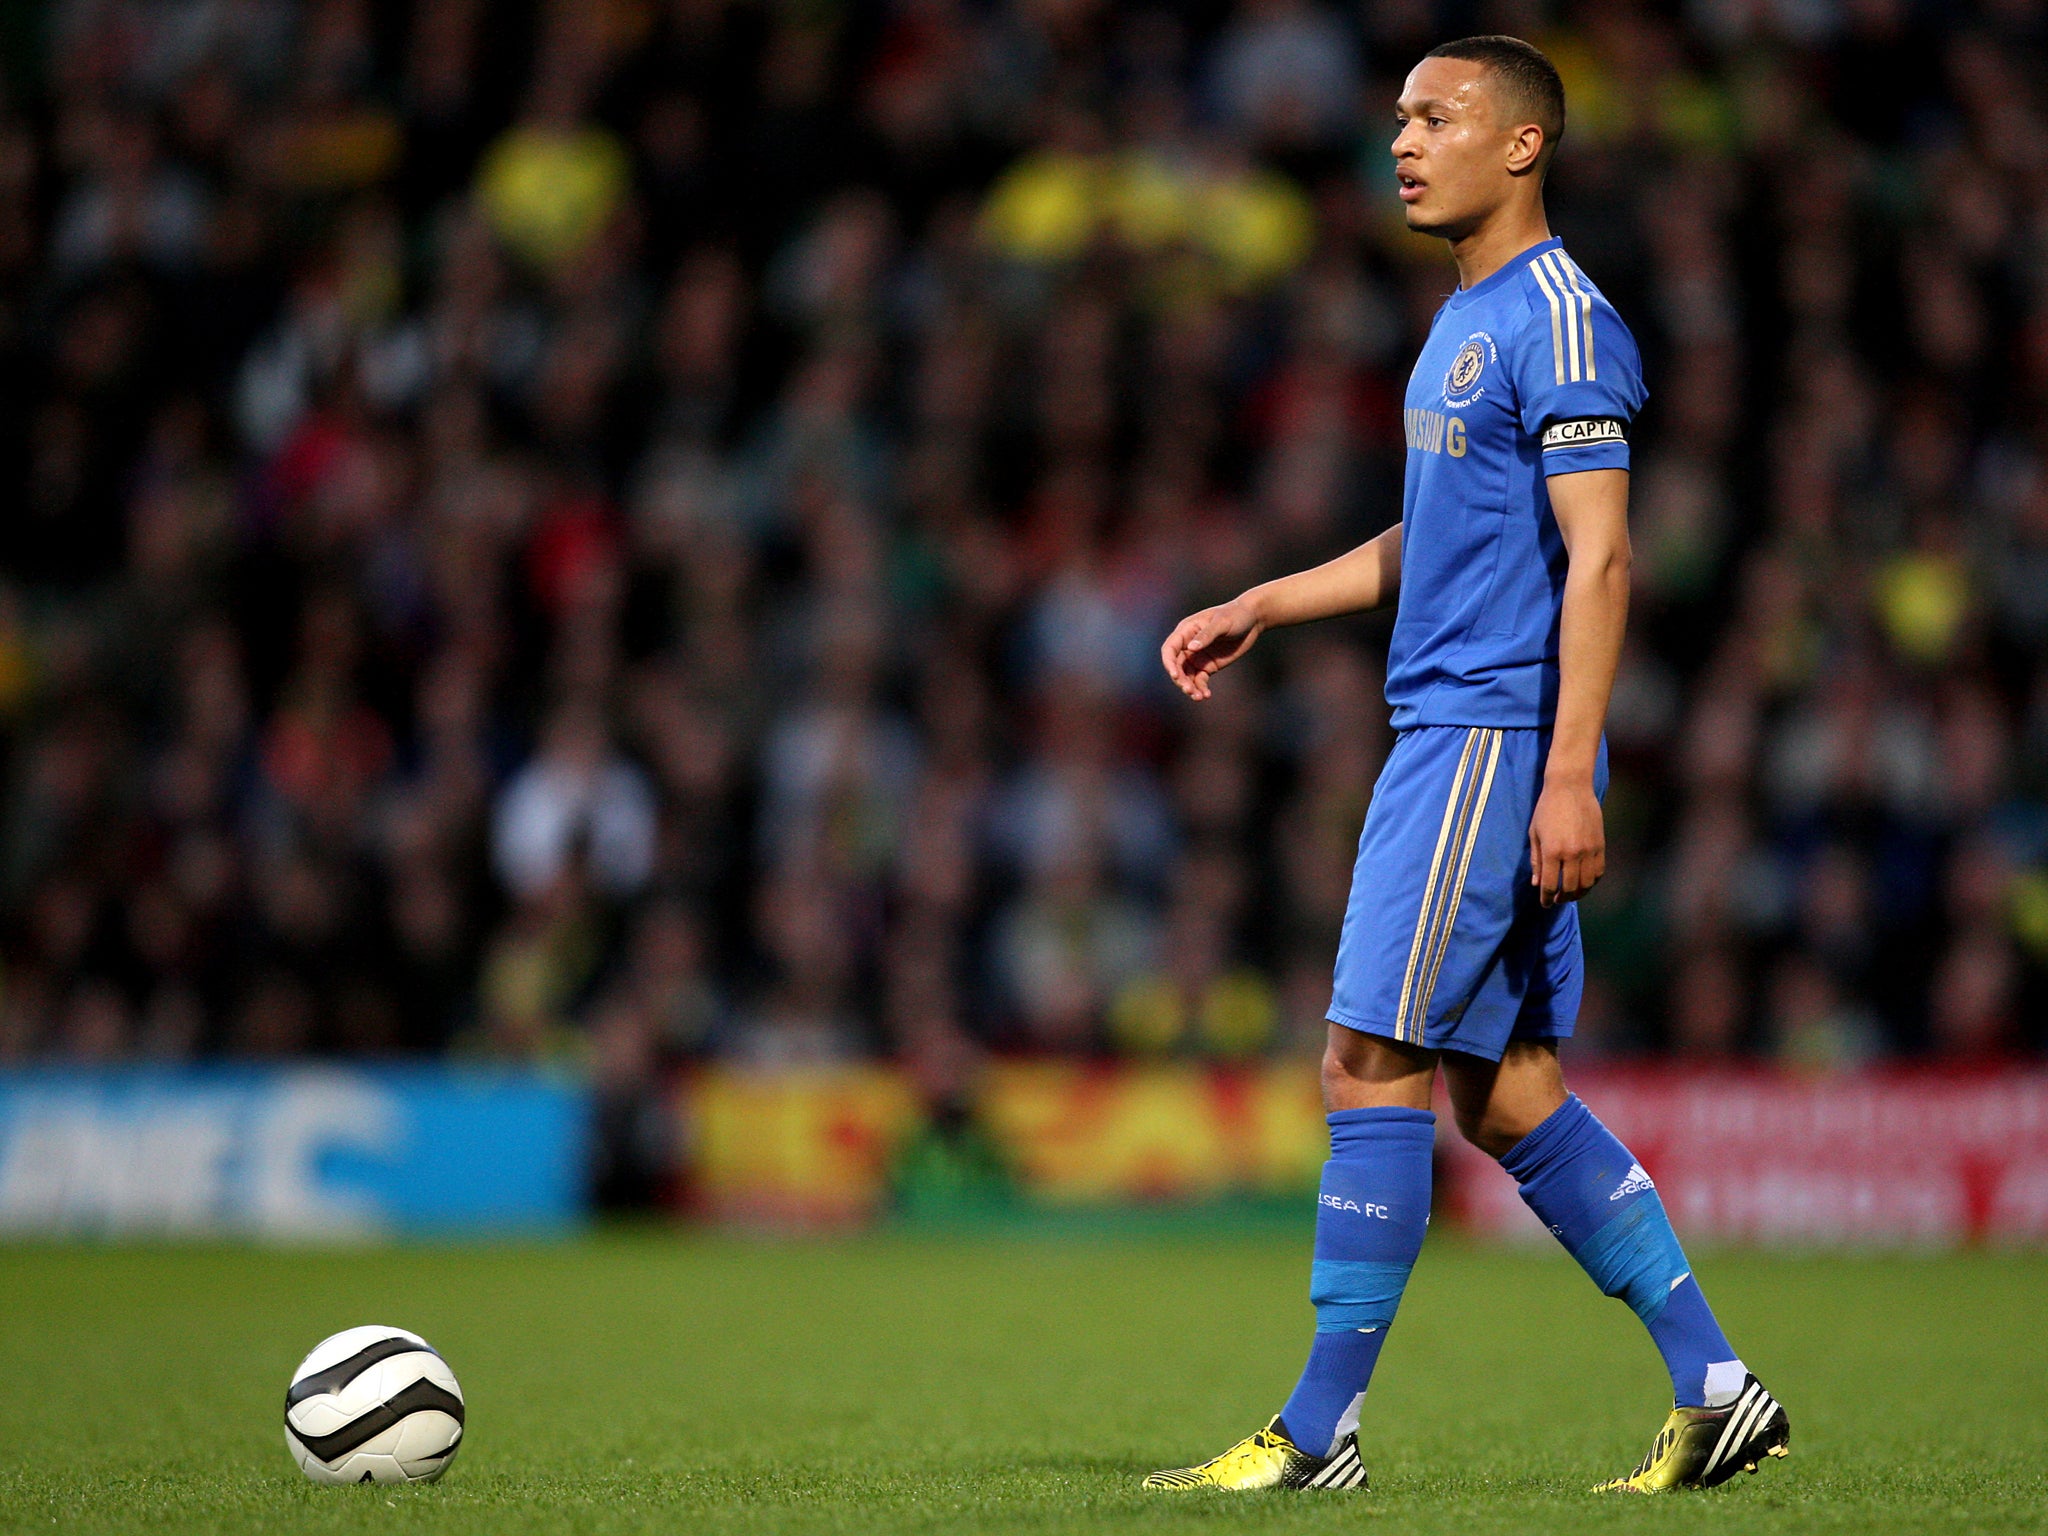 Lewis Baker in action for Chelsea